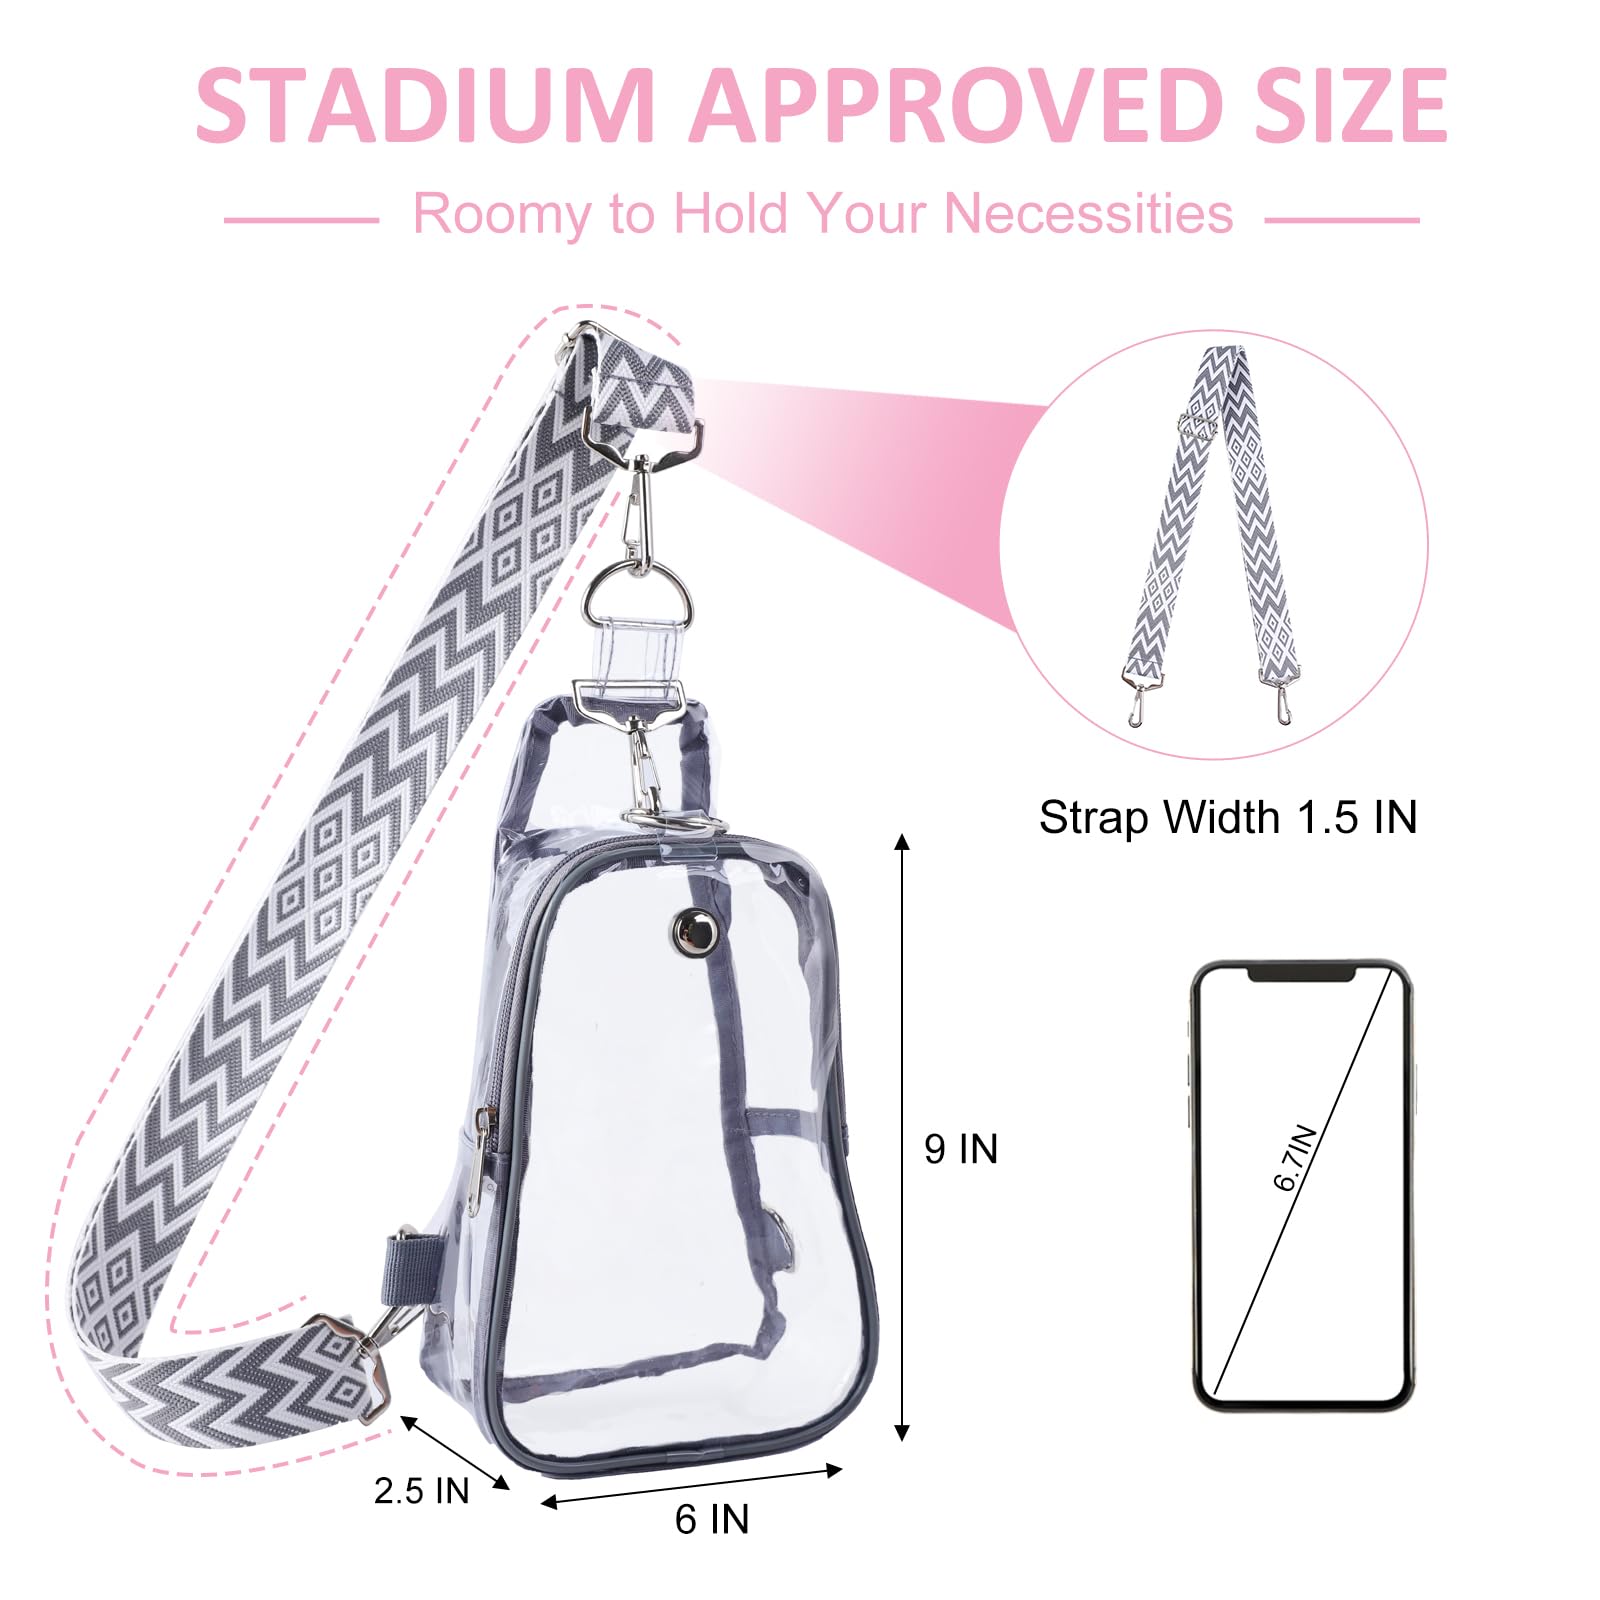 Clear Bag Stadium Approved, Clear Sling Bag with Embroidered Strap, Clear Crossbody Fanny Pack for Concerts Festivals Sports Events-Grey